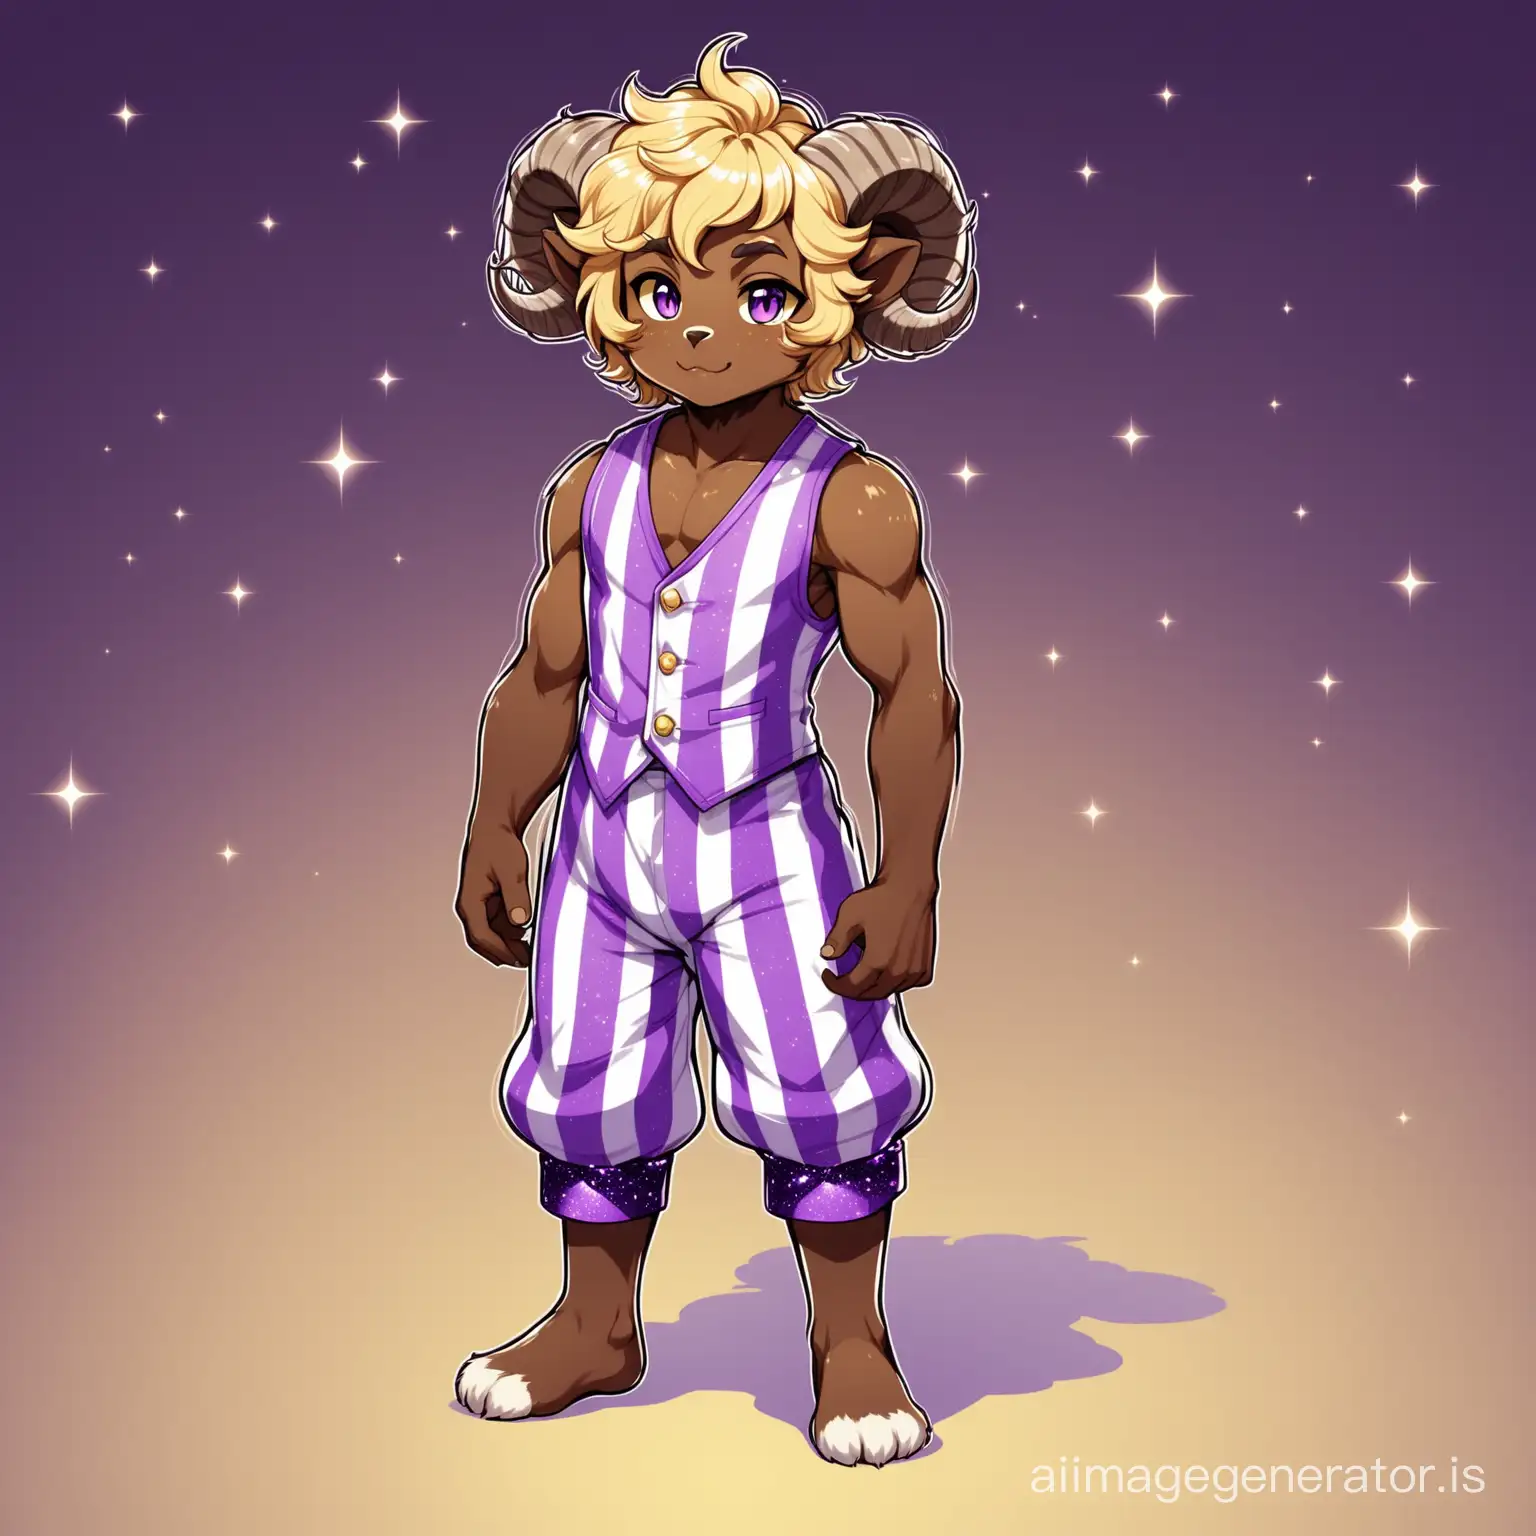 Dark skinned male satyr with curly blond hair and childlike proportions with furry goatlike legs. Wearing a purple sparkly vest and purple striped knickerbockers.